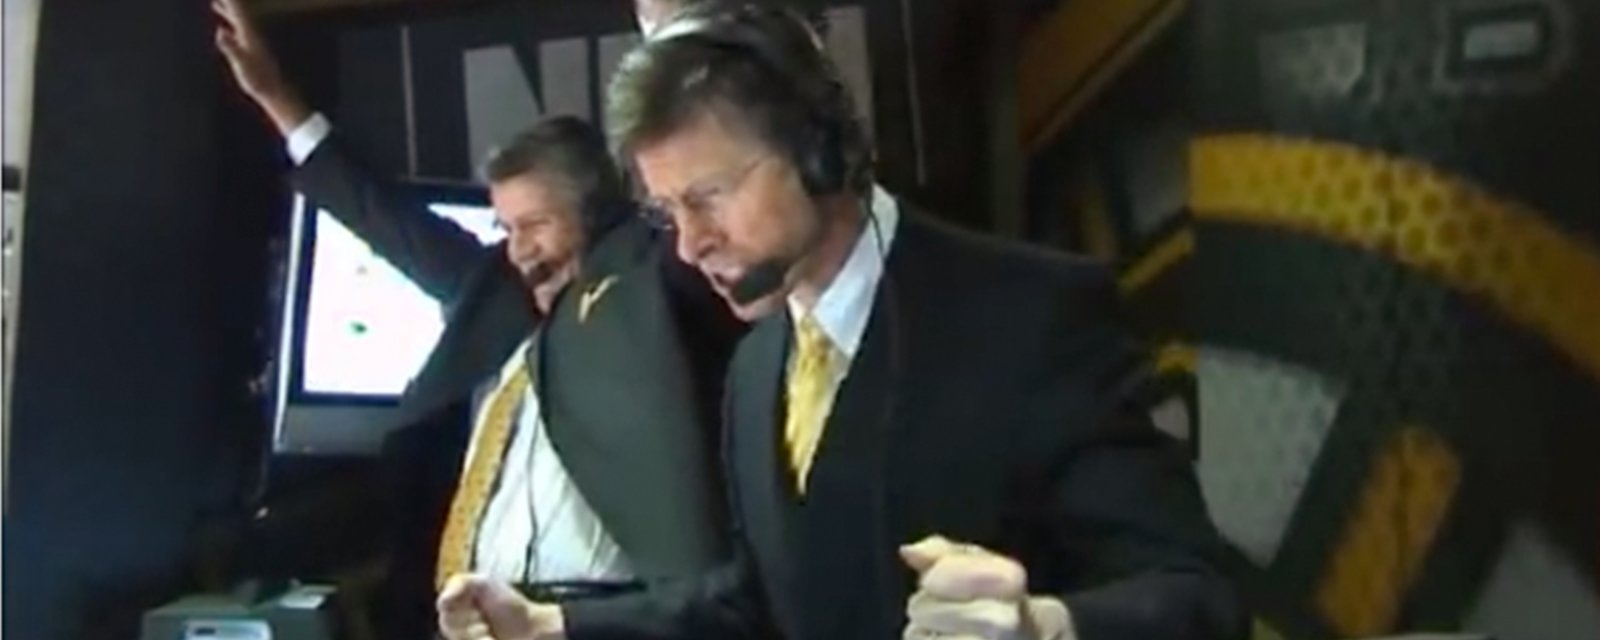 Bruins broadcaster Jack Edwards gets triggered by Dougie Hamilton, delivers over the top goal call